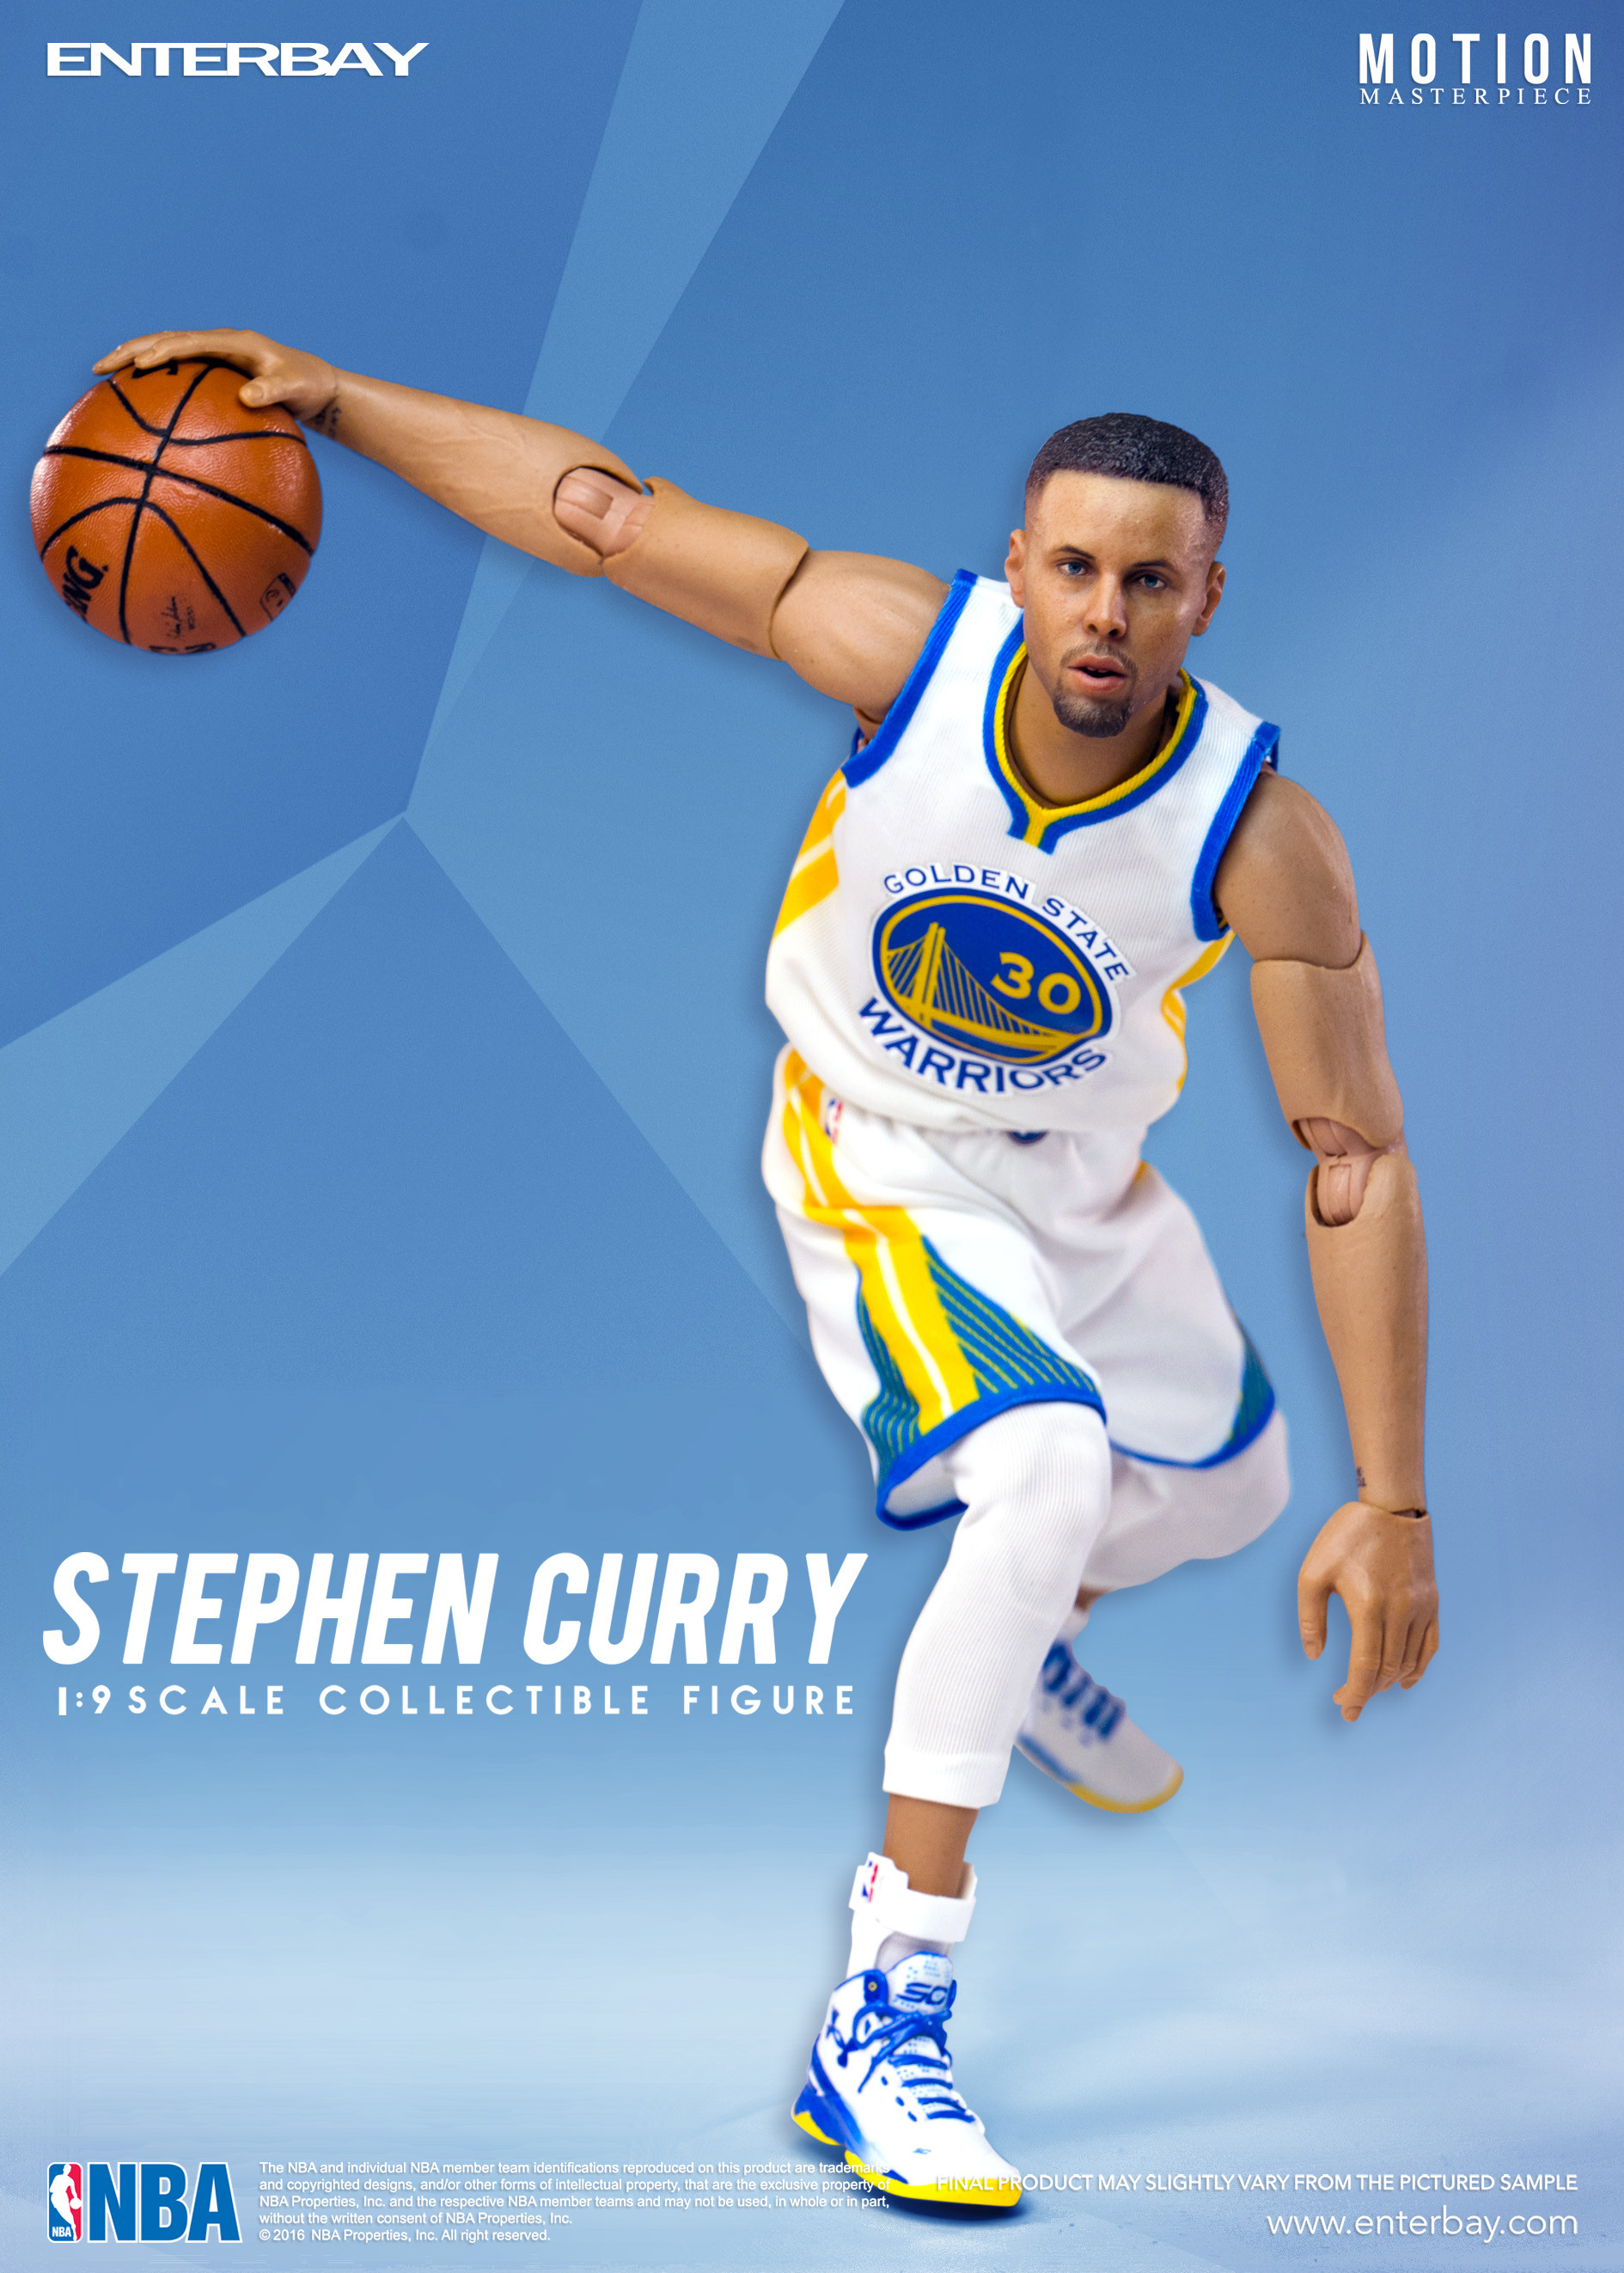 steph curry live wallpapers,basketball player,player,sports,sportswear,team sport